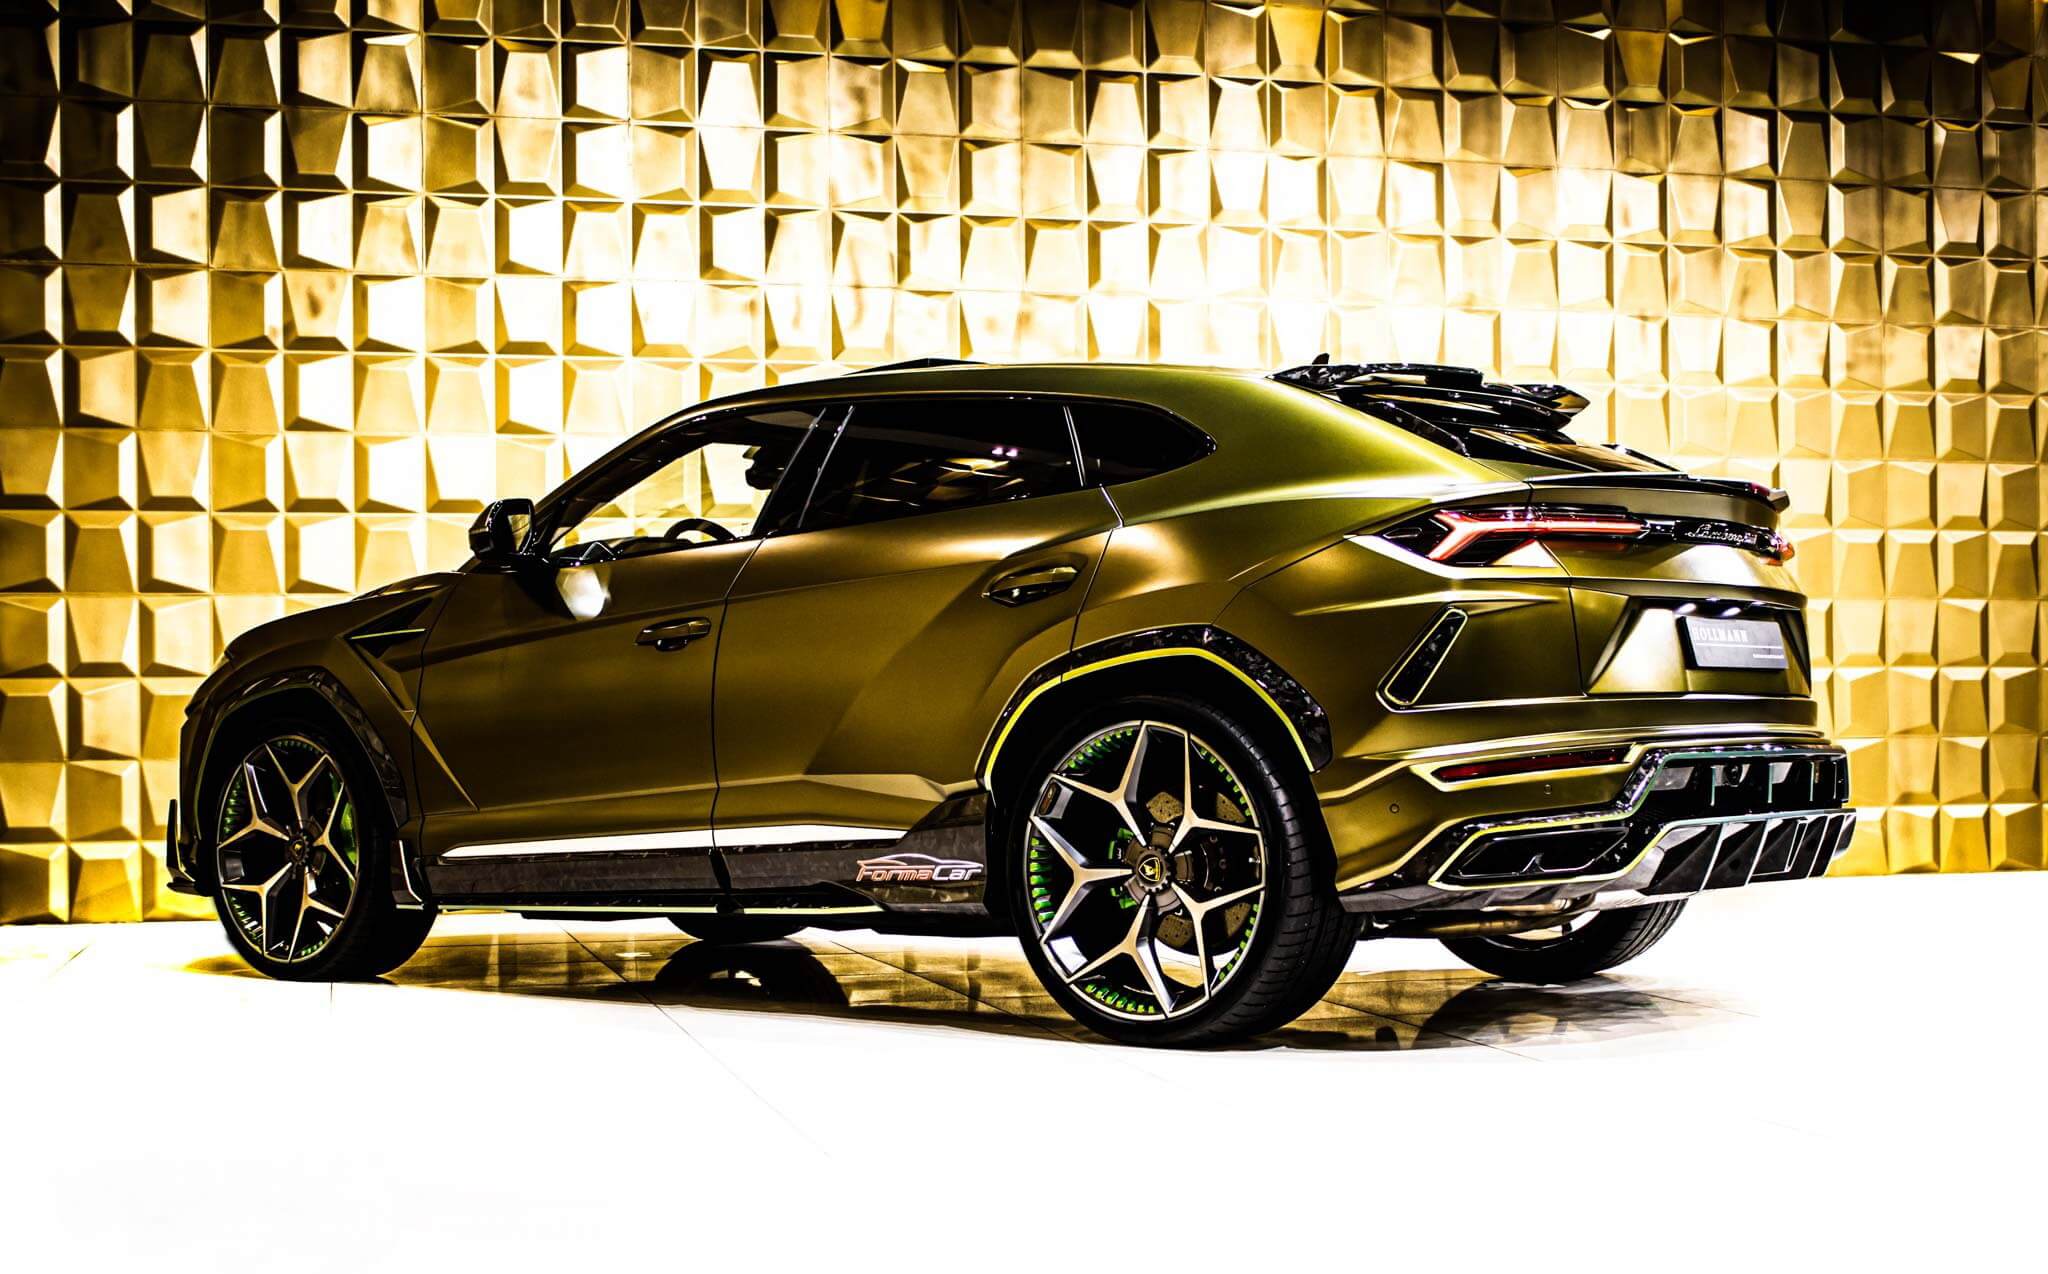 Check our price and buy a SCL Performance body kit for Lamborghini Urus